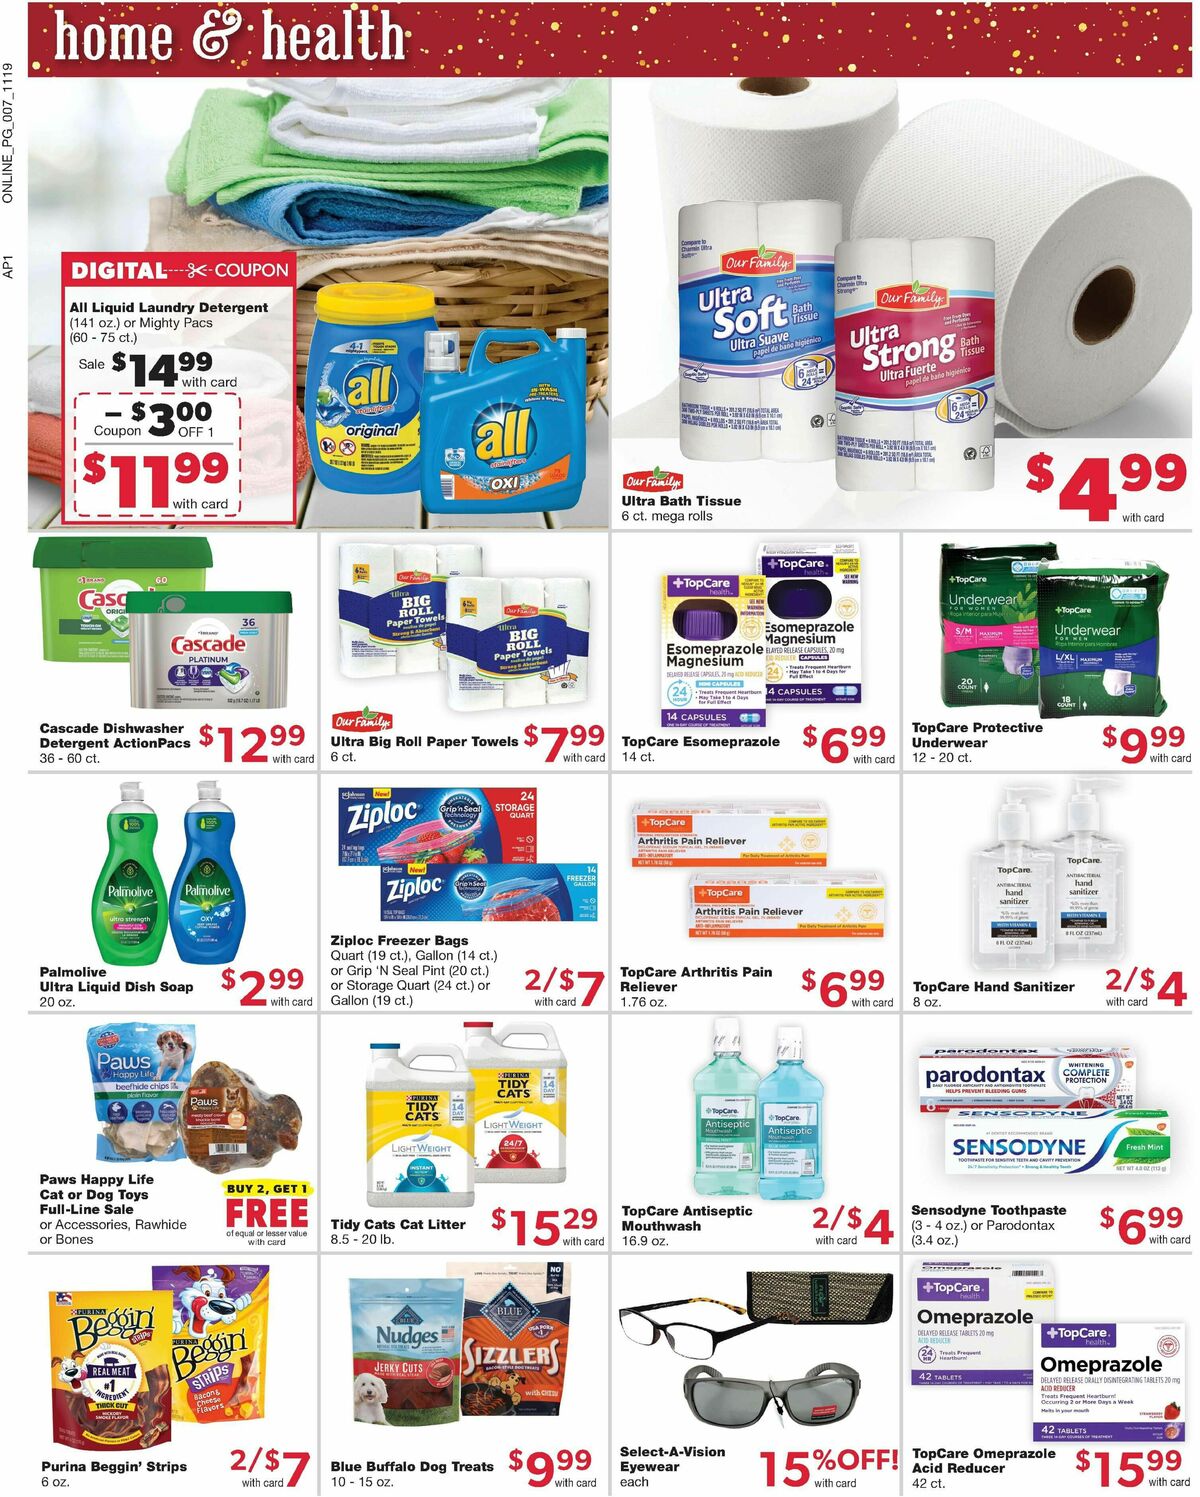 Family Fare Weekly Ad from November 19